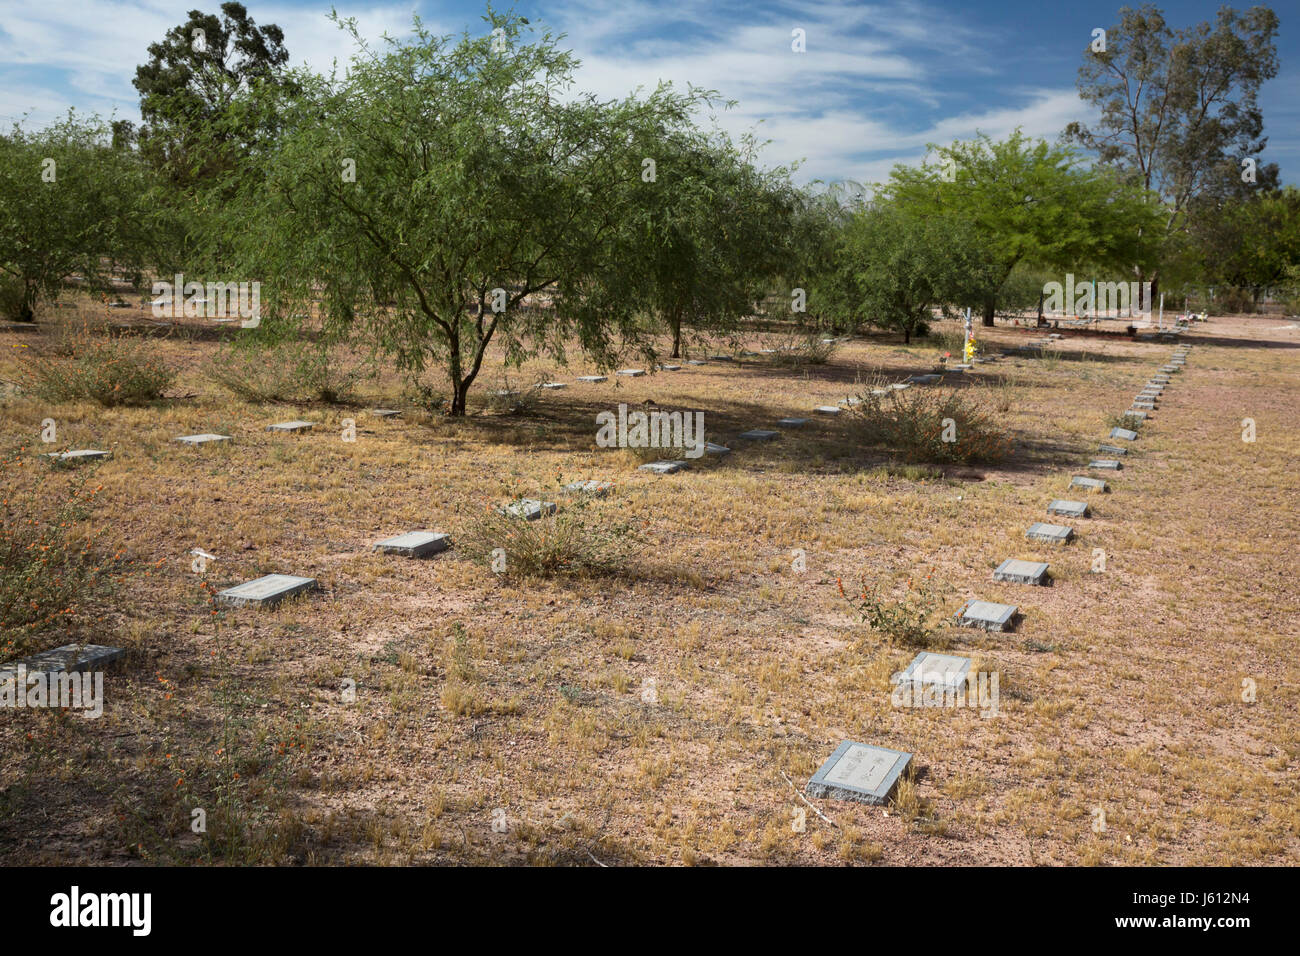 Tucson, Arizona - The Pima County Cemetery, where the indigent, the homeless, and unidentified have been buried, including migrants who died crossing  Stock Photo